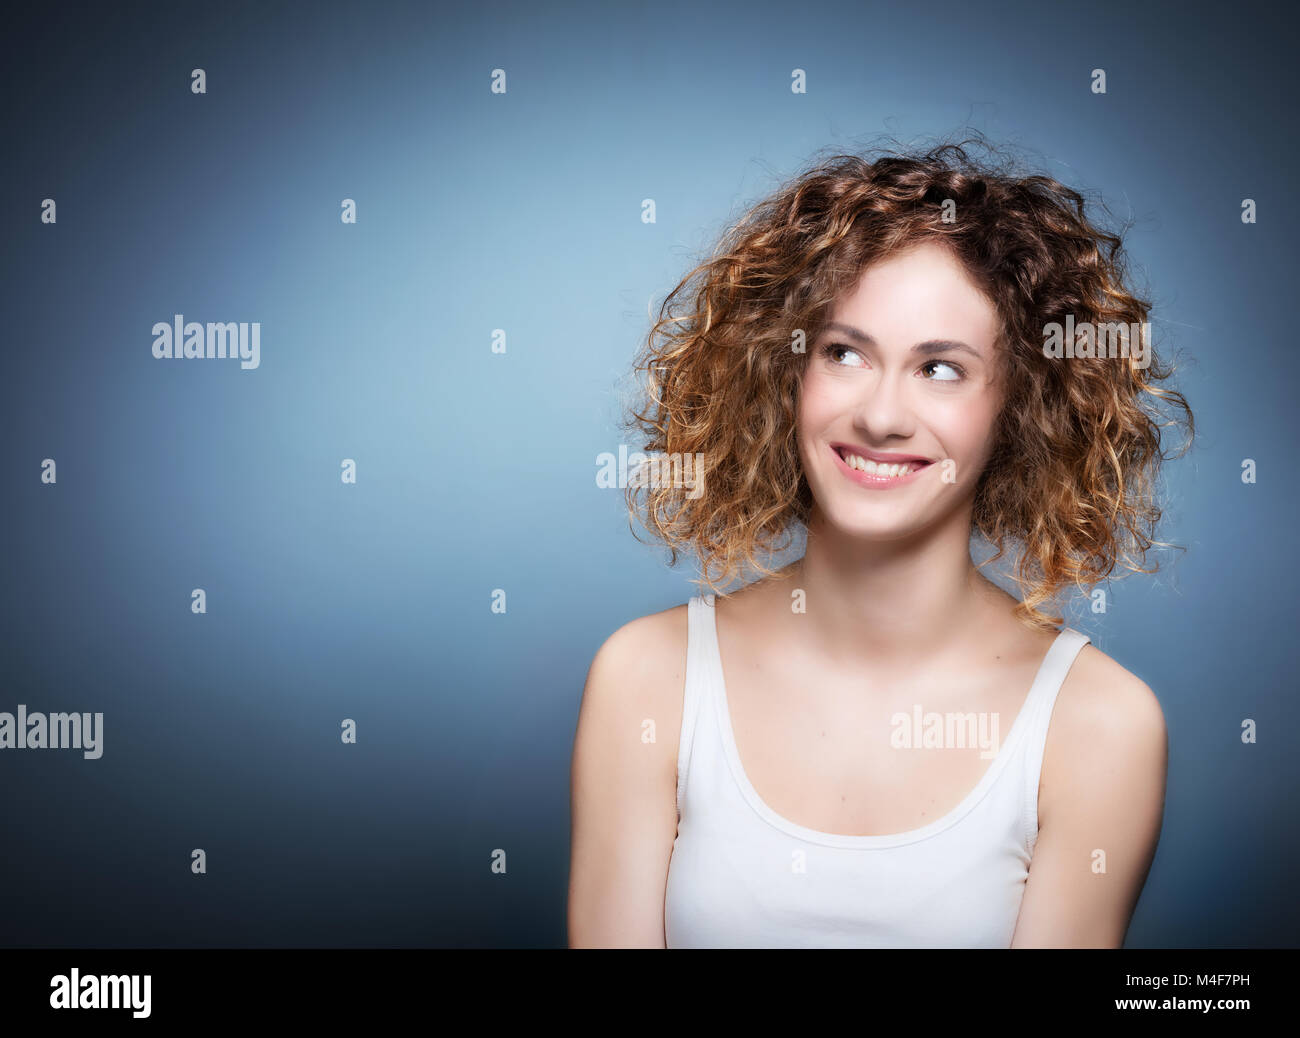 Casual portrait of a cute, authentic girl. Stock Photo